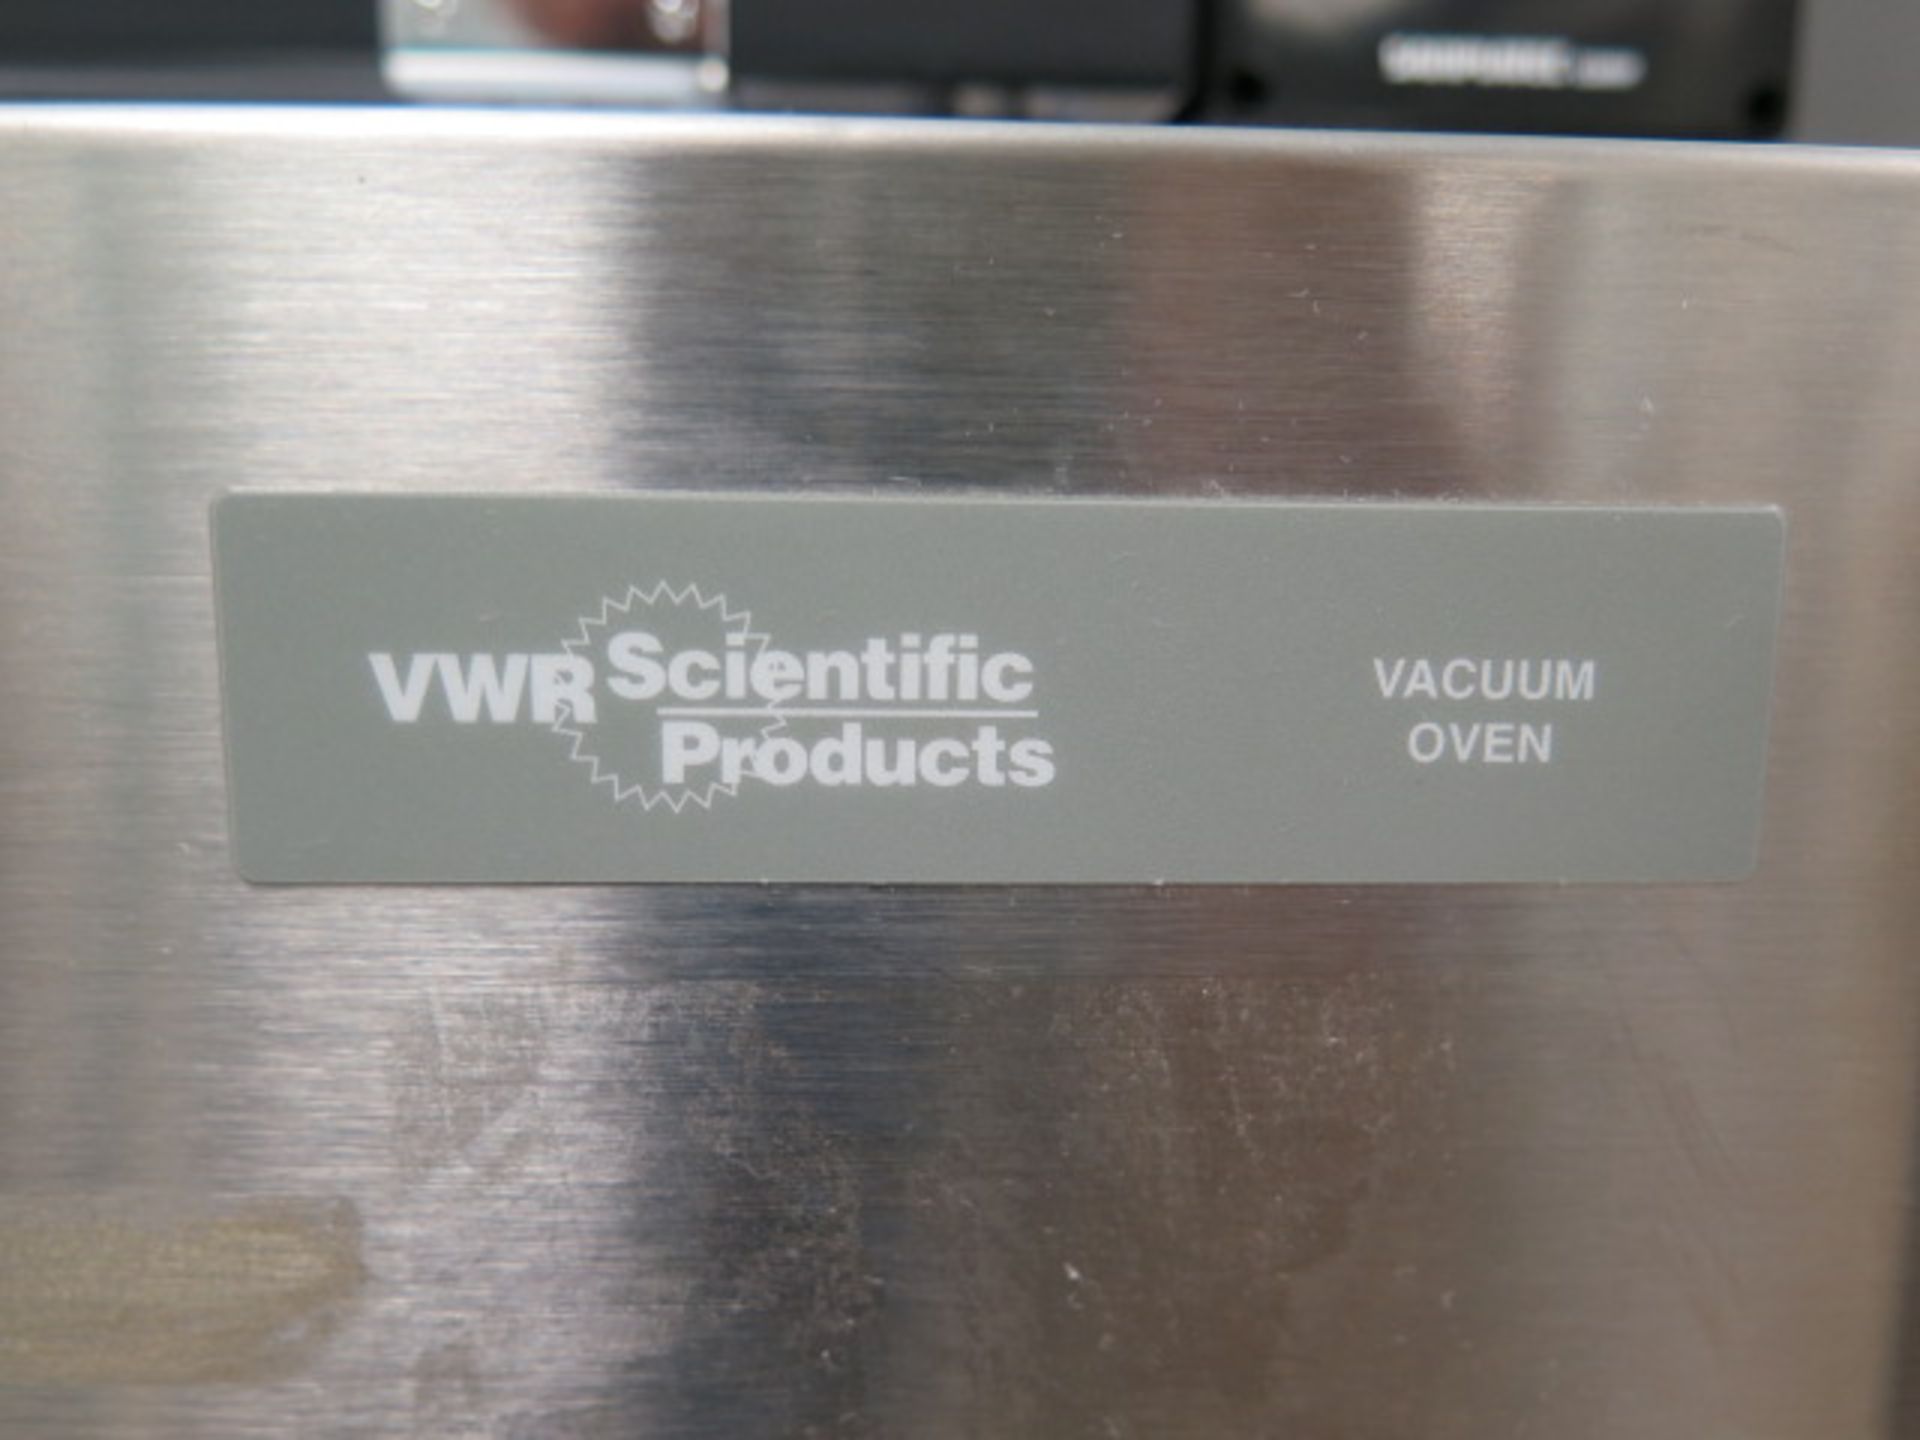 VWR mdl. 1430M Vacuum Oven s/n 1201098 60-105 Degrees C (SOLD AS-IS - NO WARRANTY) - Image 9 of 10